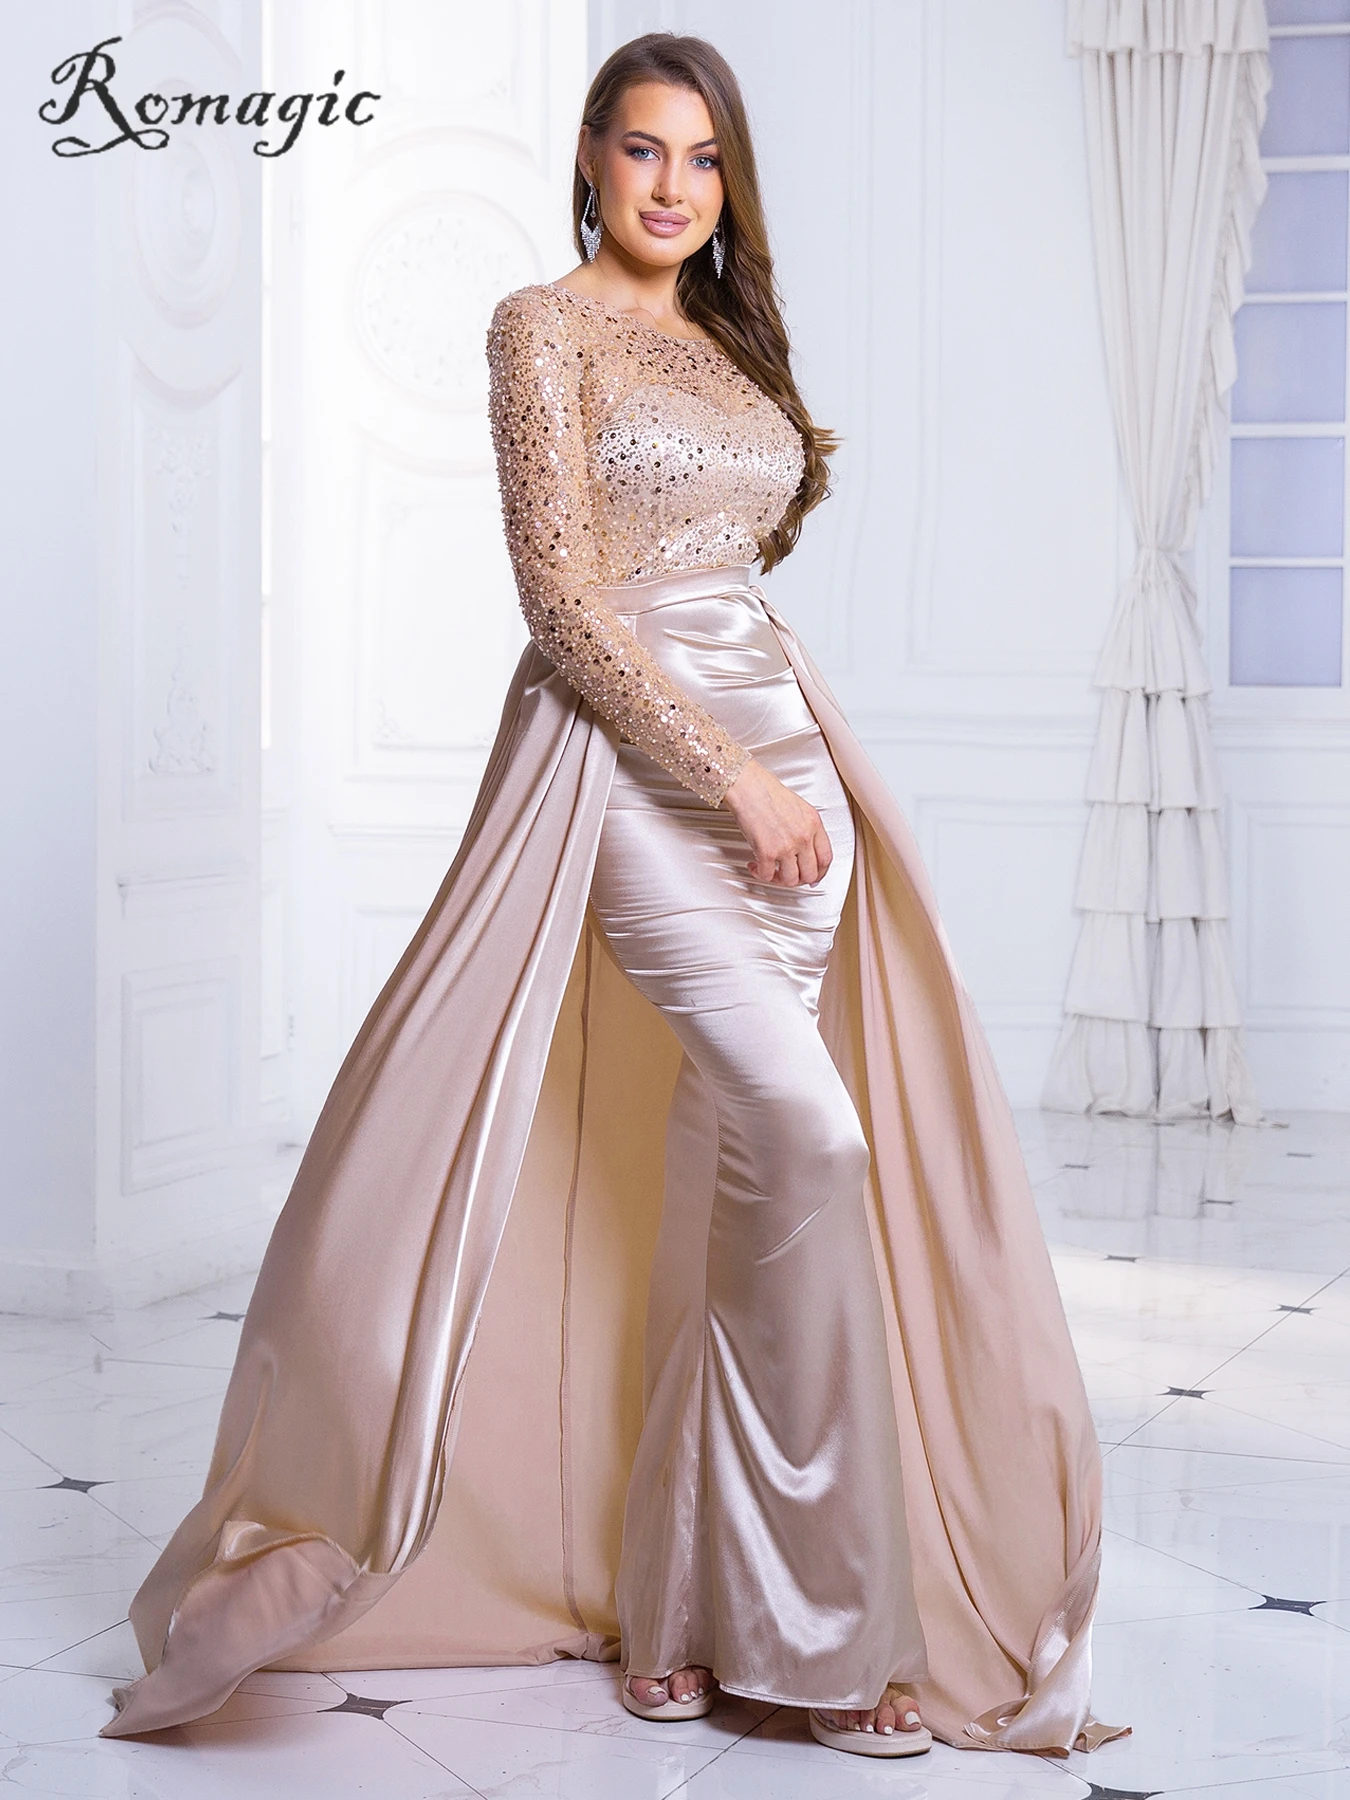 

Romagic Modest O Neck Full Sleeve Exquisite Evening Prom Dress Sequin Pearls With Long Train Gold Women Wedding Party Gown